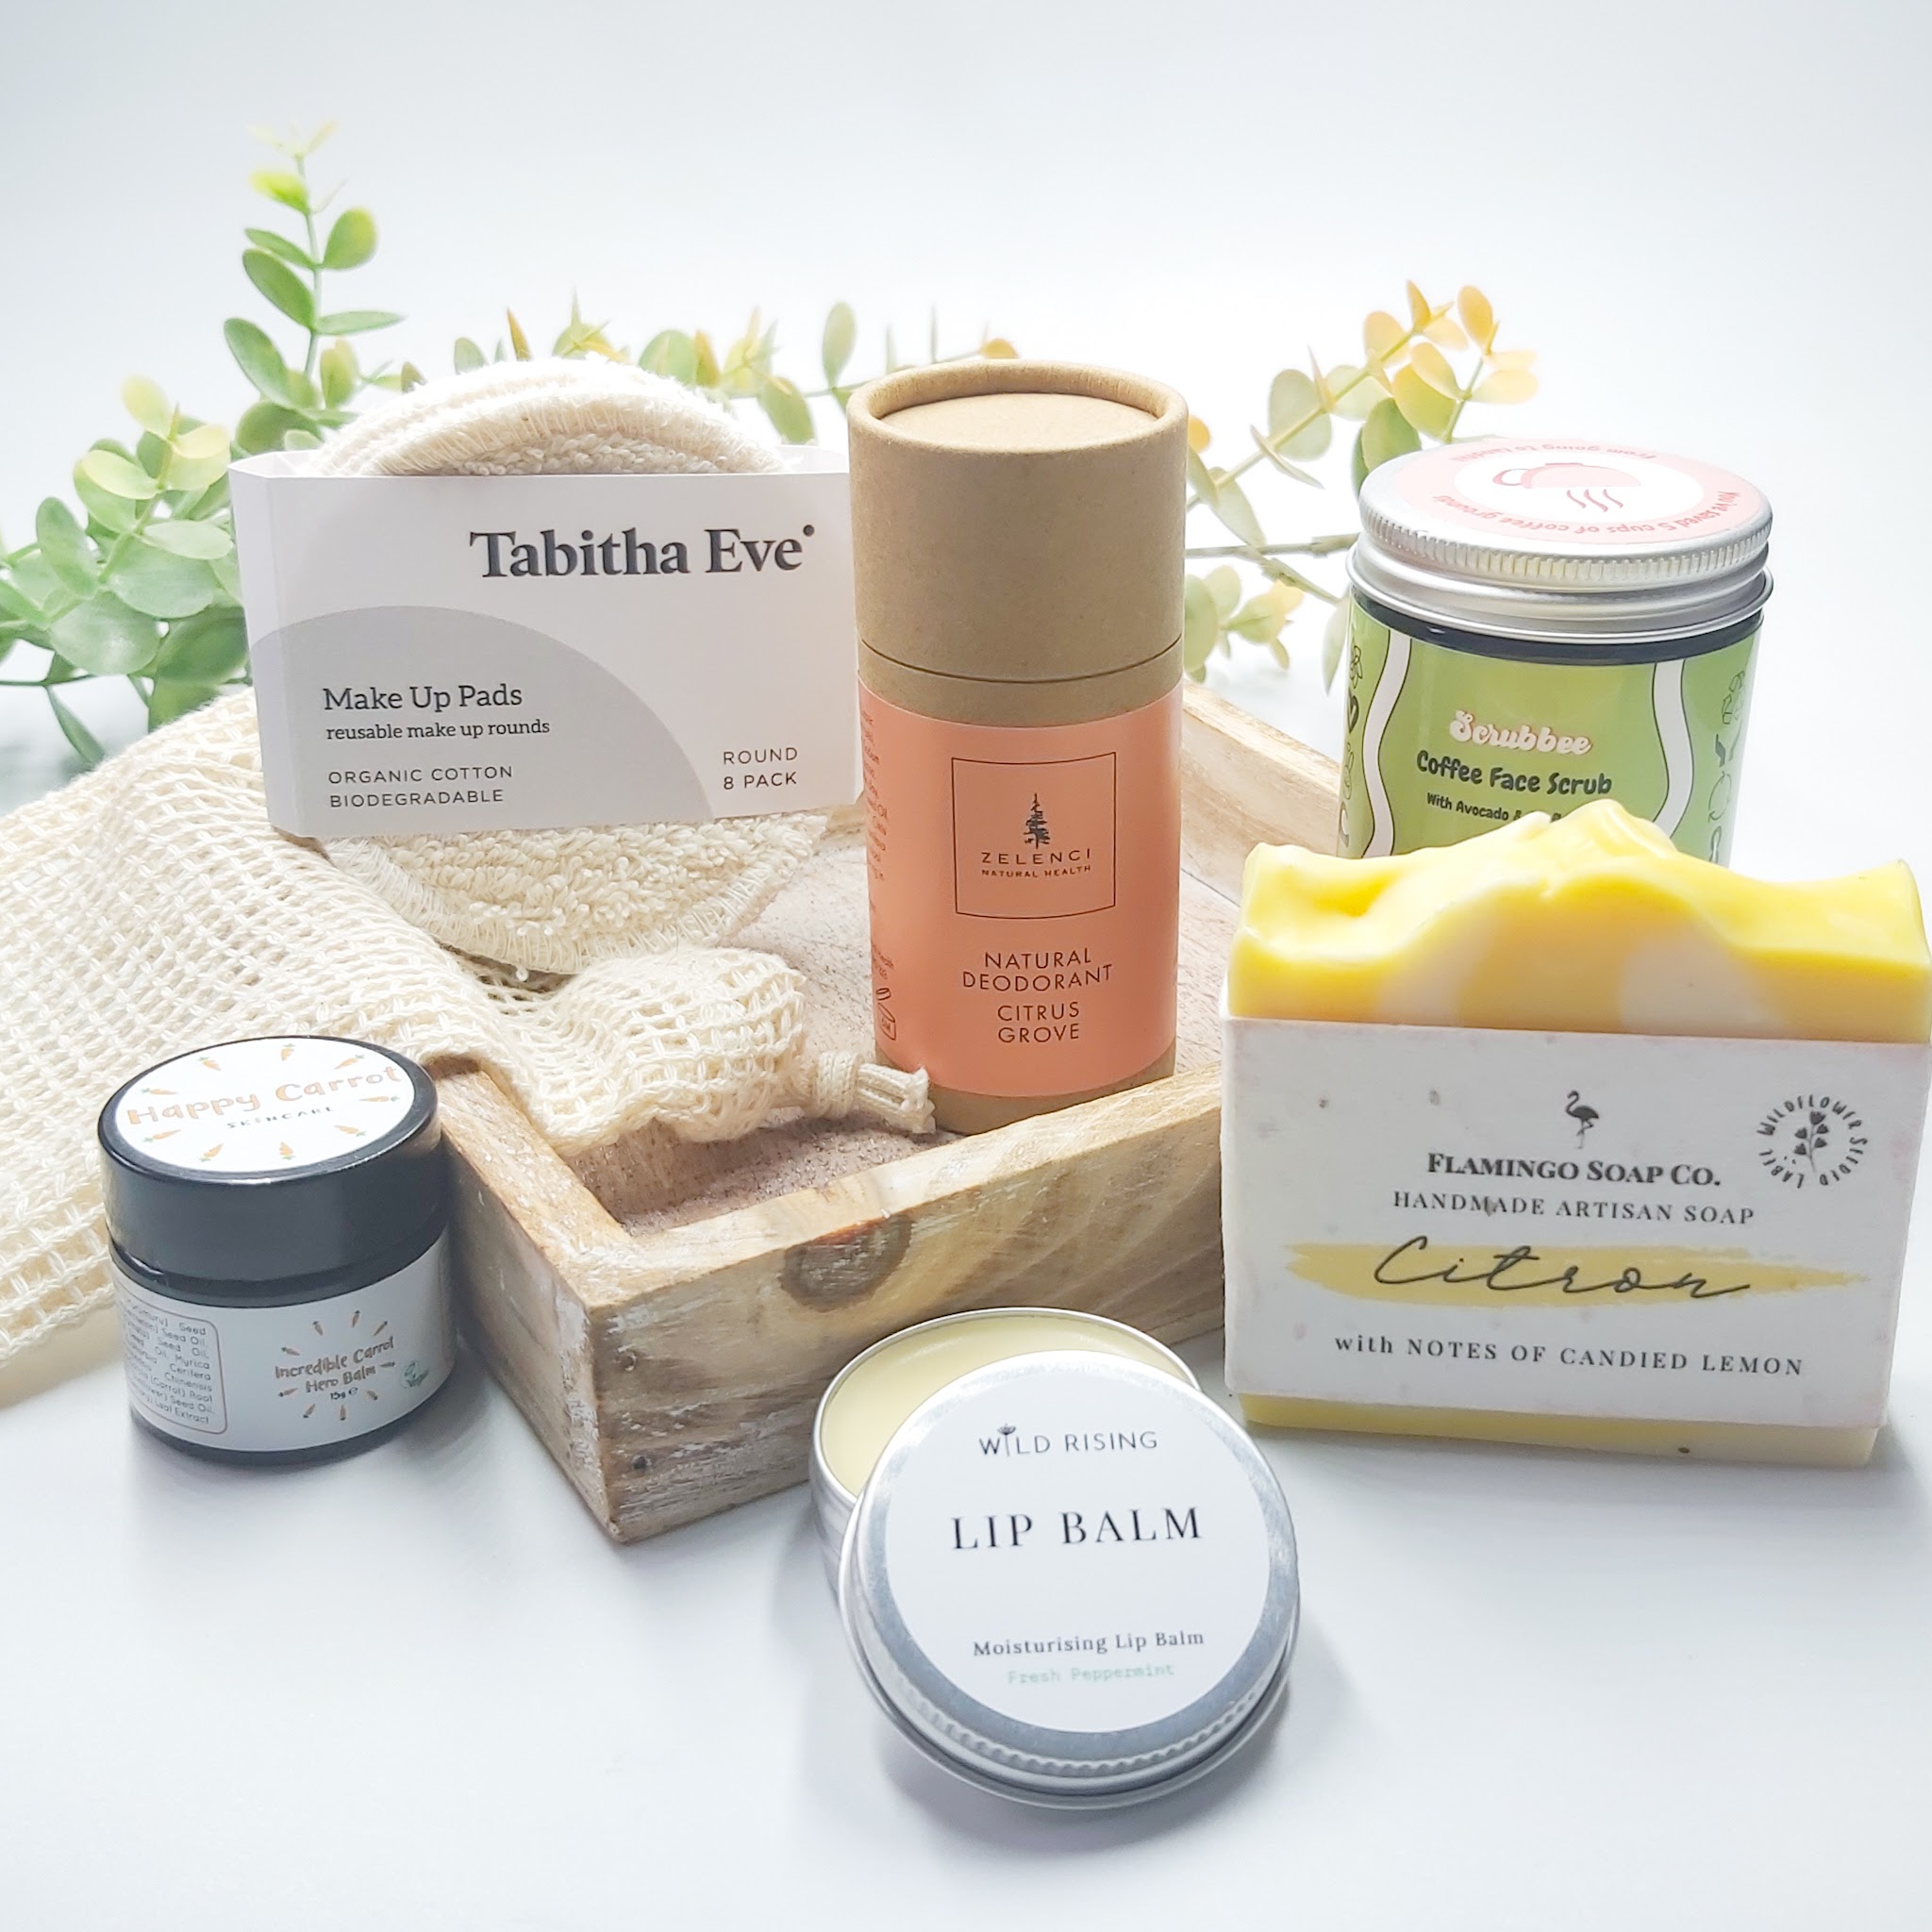 All the sustainable beauty products featured in this Counter Culture Beauty Store Green Beauty Guide - Review by Beauty Folio.